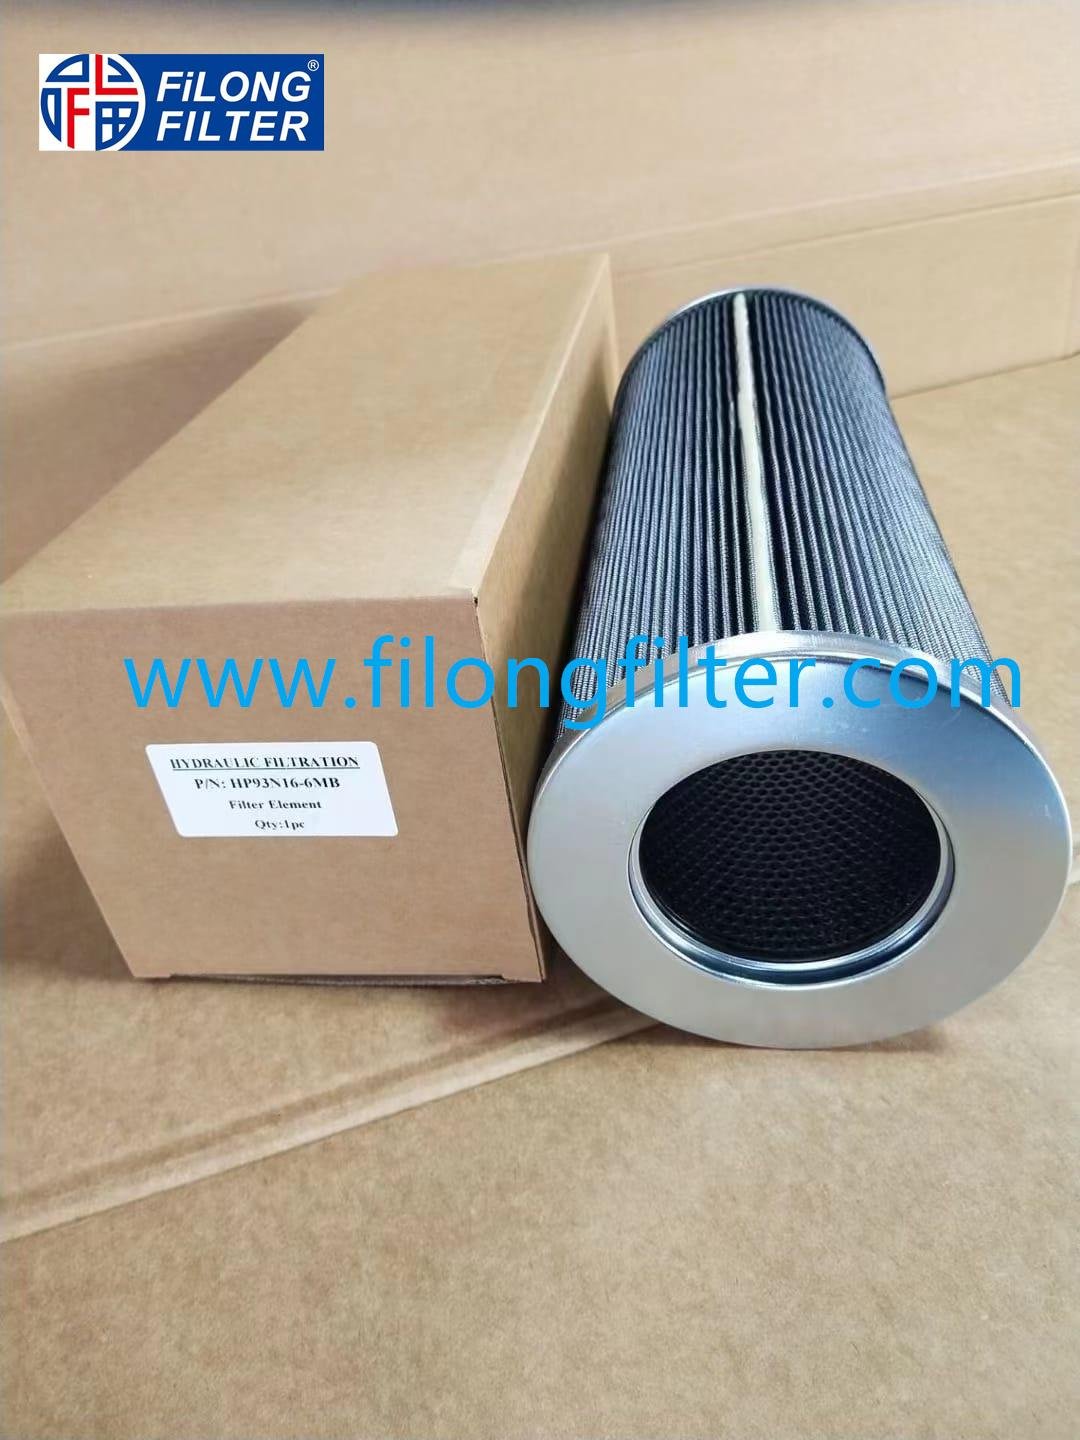 HP93N16-6MB,CHINA HYDRAULIC FILTER Manufacturer  ,CHINA HYDRAULIC FILTER Factory, China HYDRAULIC FILTER SUPPLIER